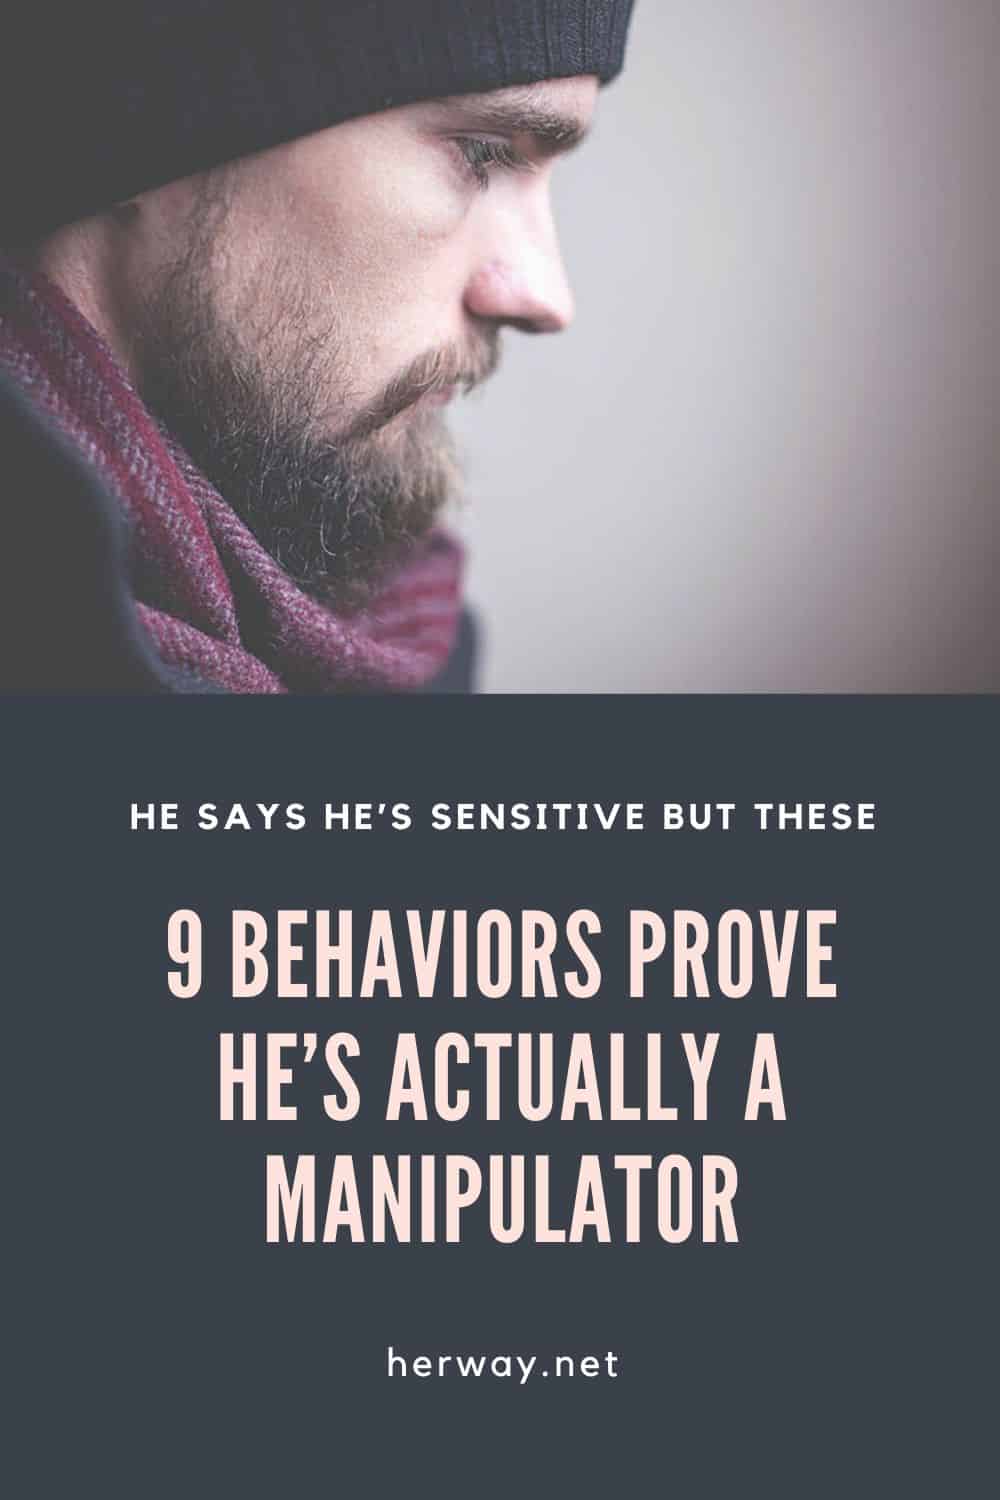 He Says He’s Sensitive But These 9 Behaviors Prove He’s Actually A Manipulator